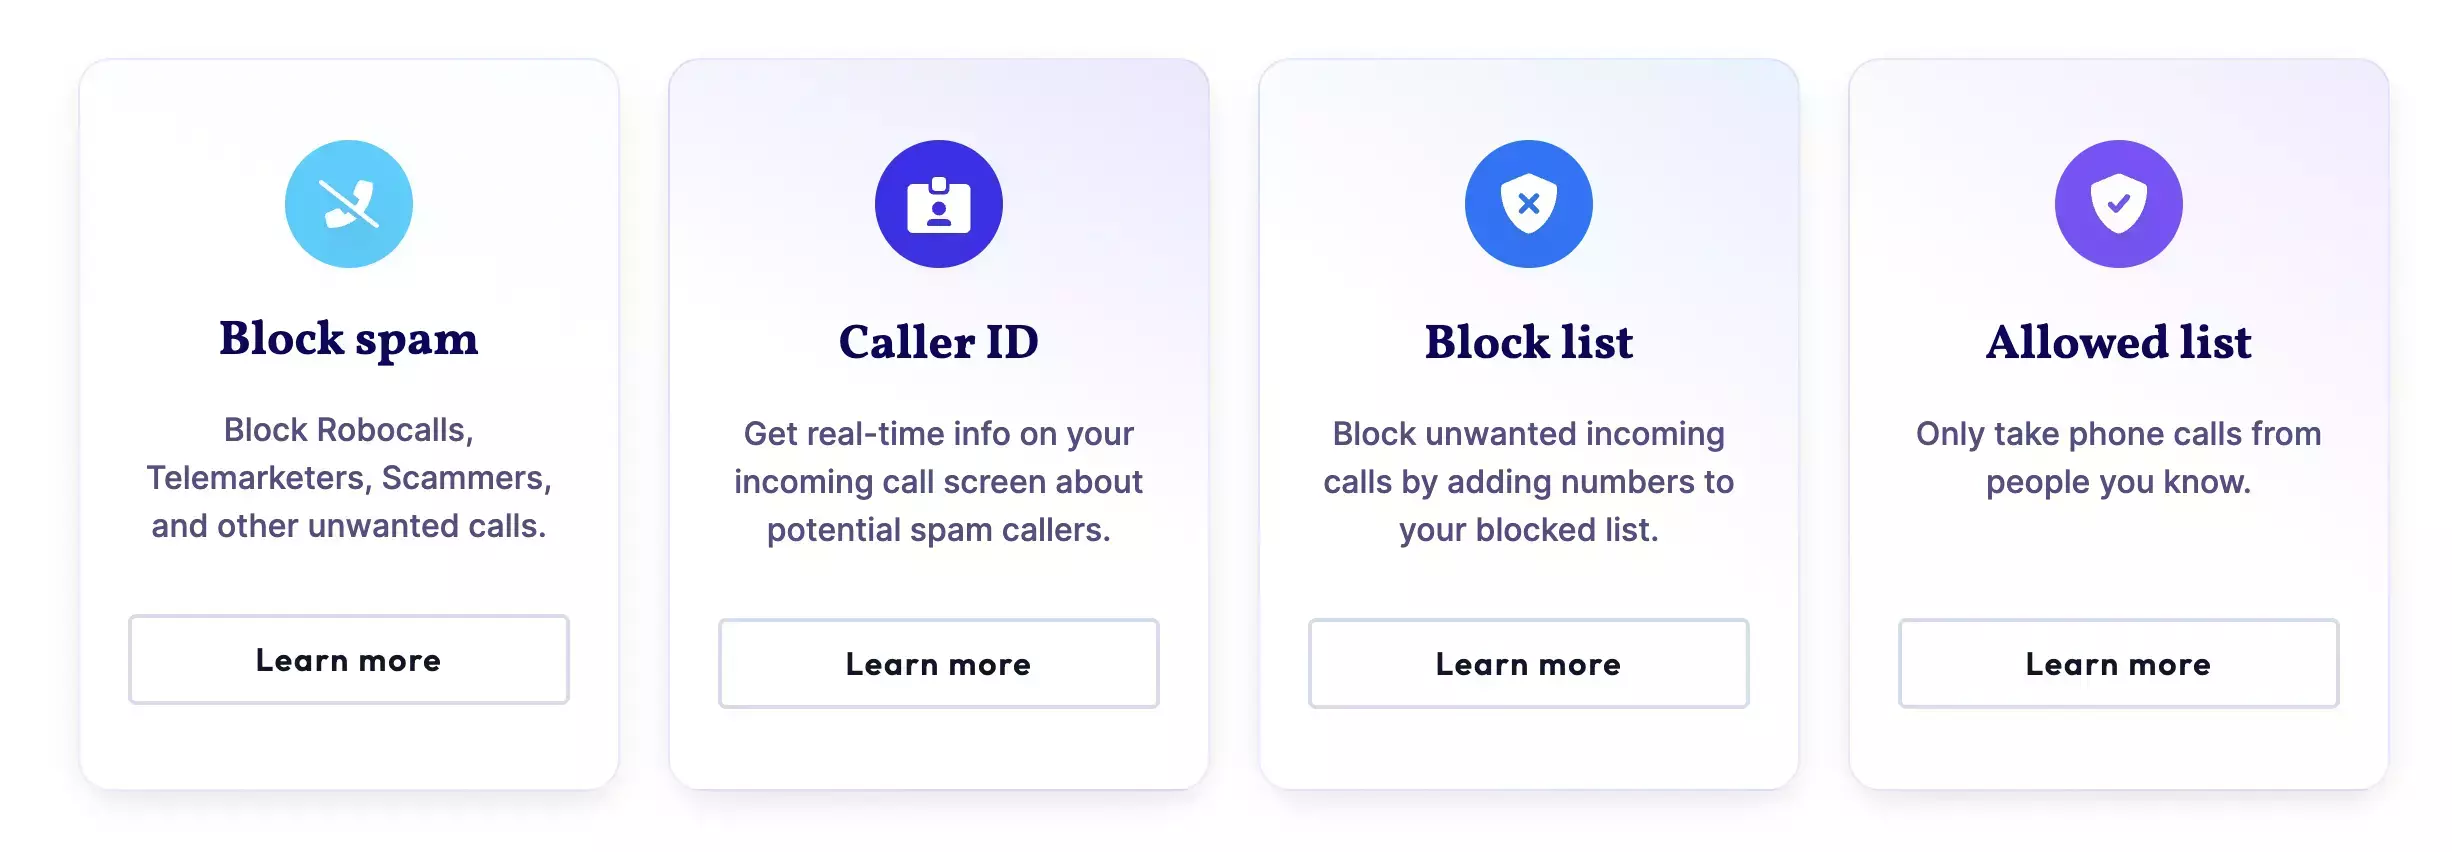 An image of Community Phone Scam call blocker features